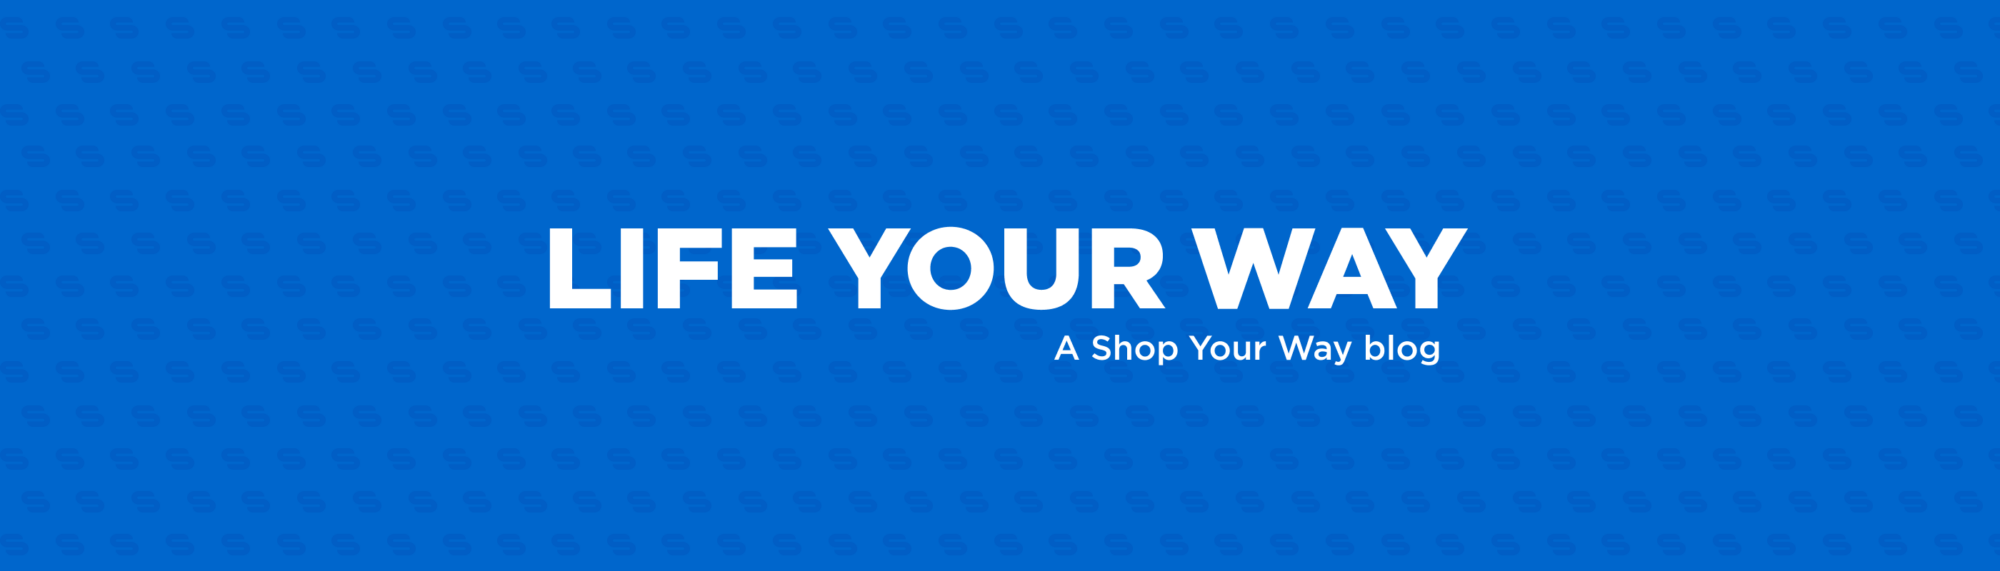 Life Your Way — A Shop Your Way Blog